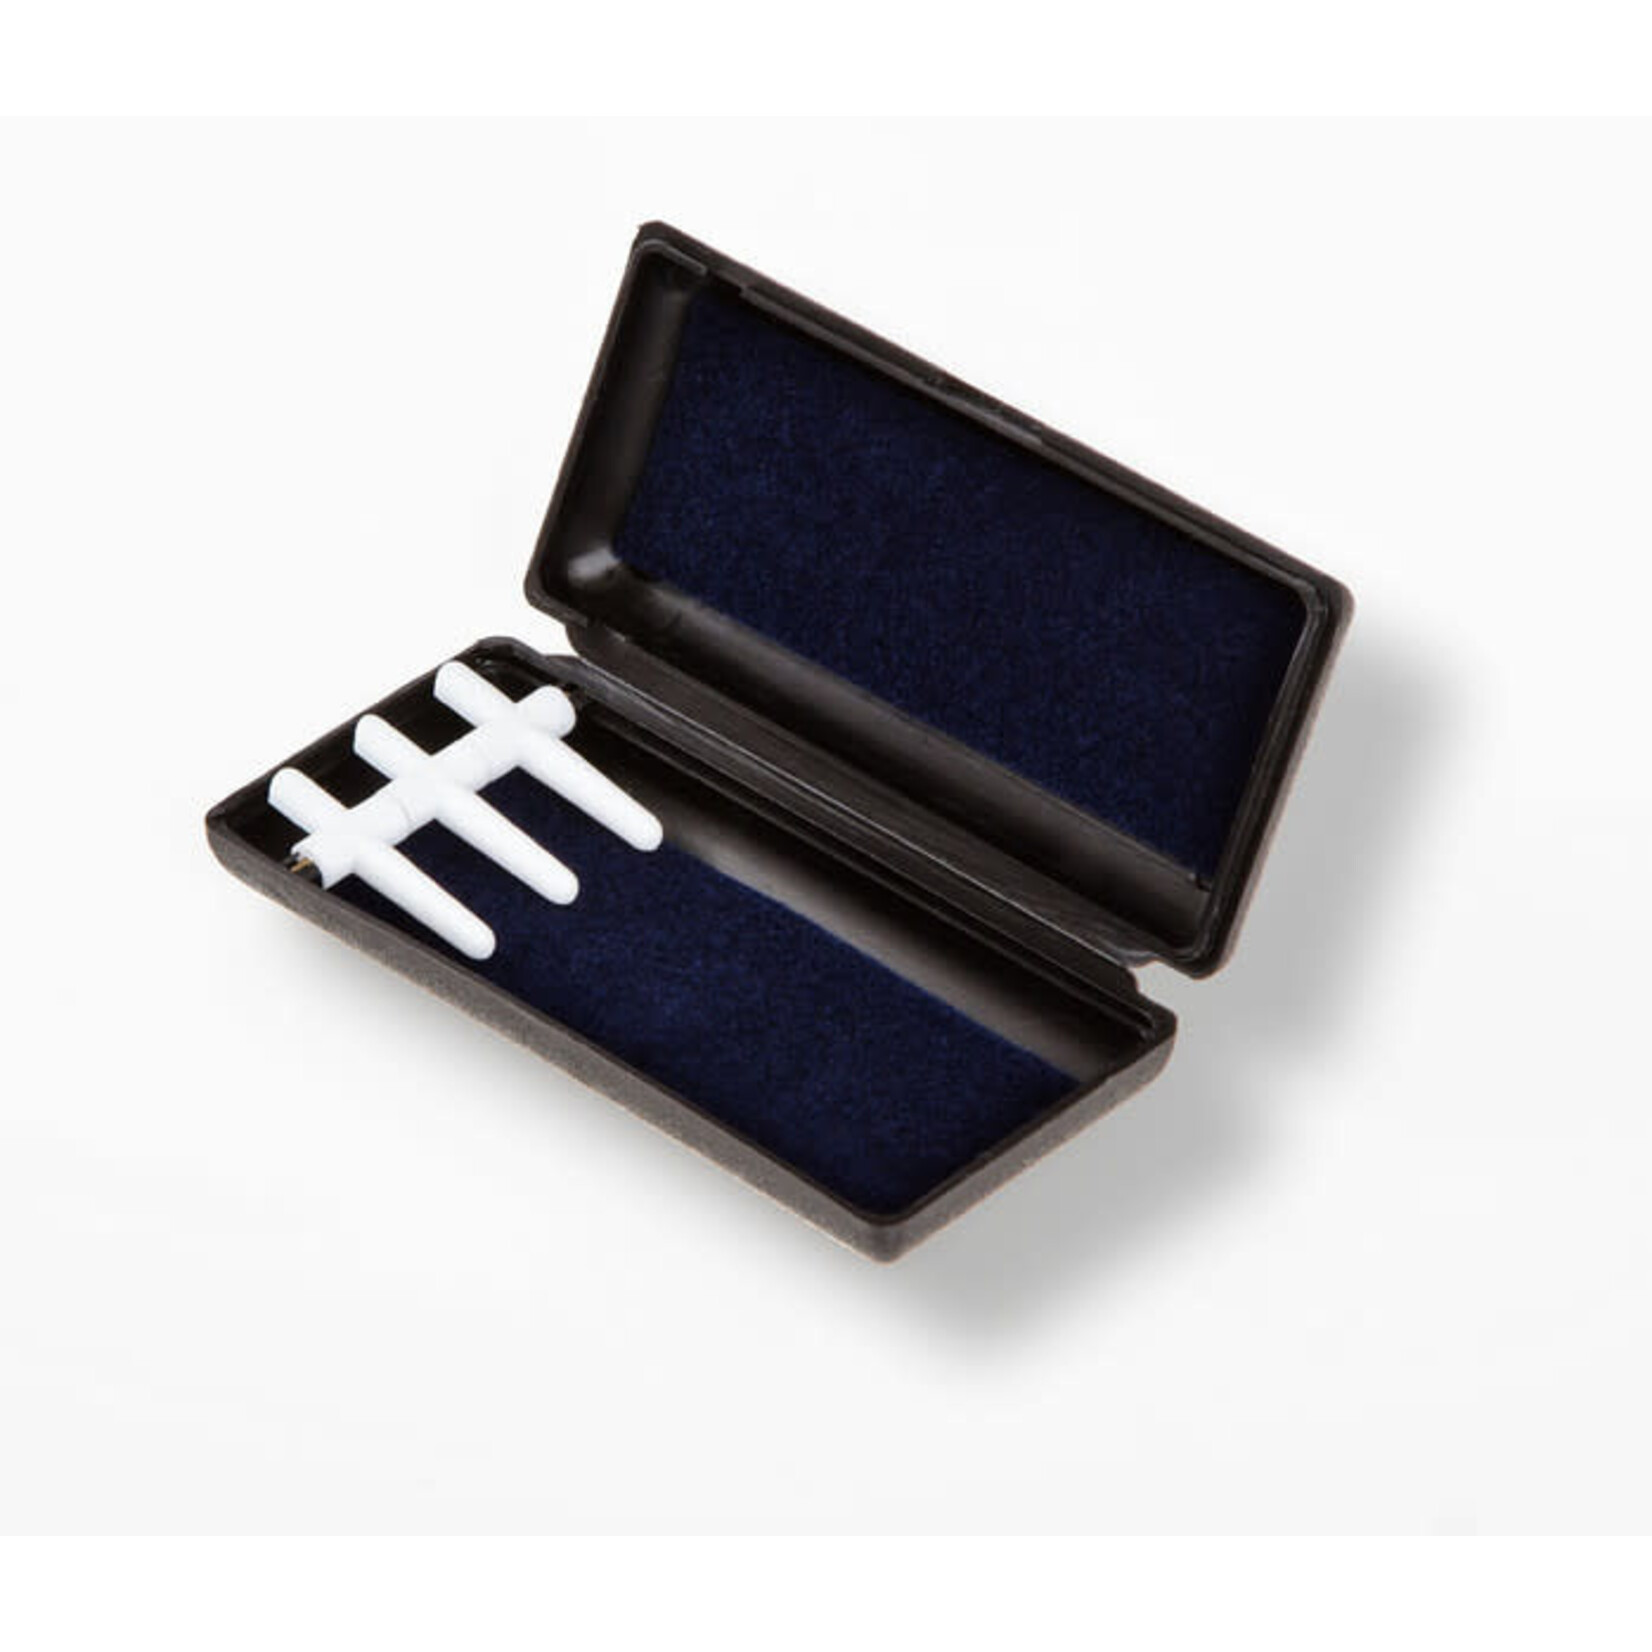 Fox Products Fox Oboe Reed Case, peg-style